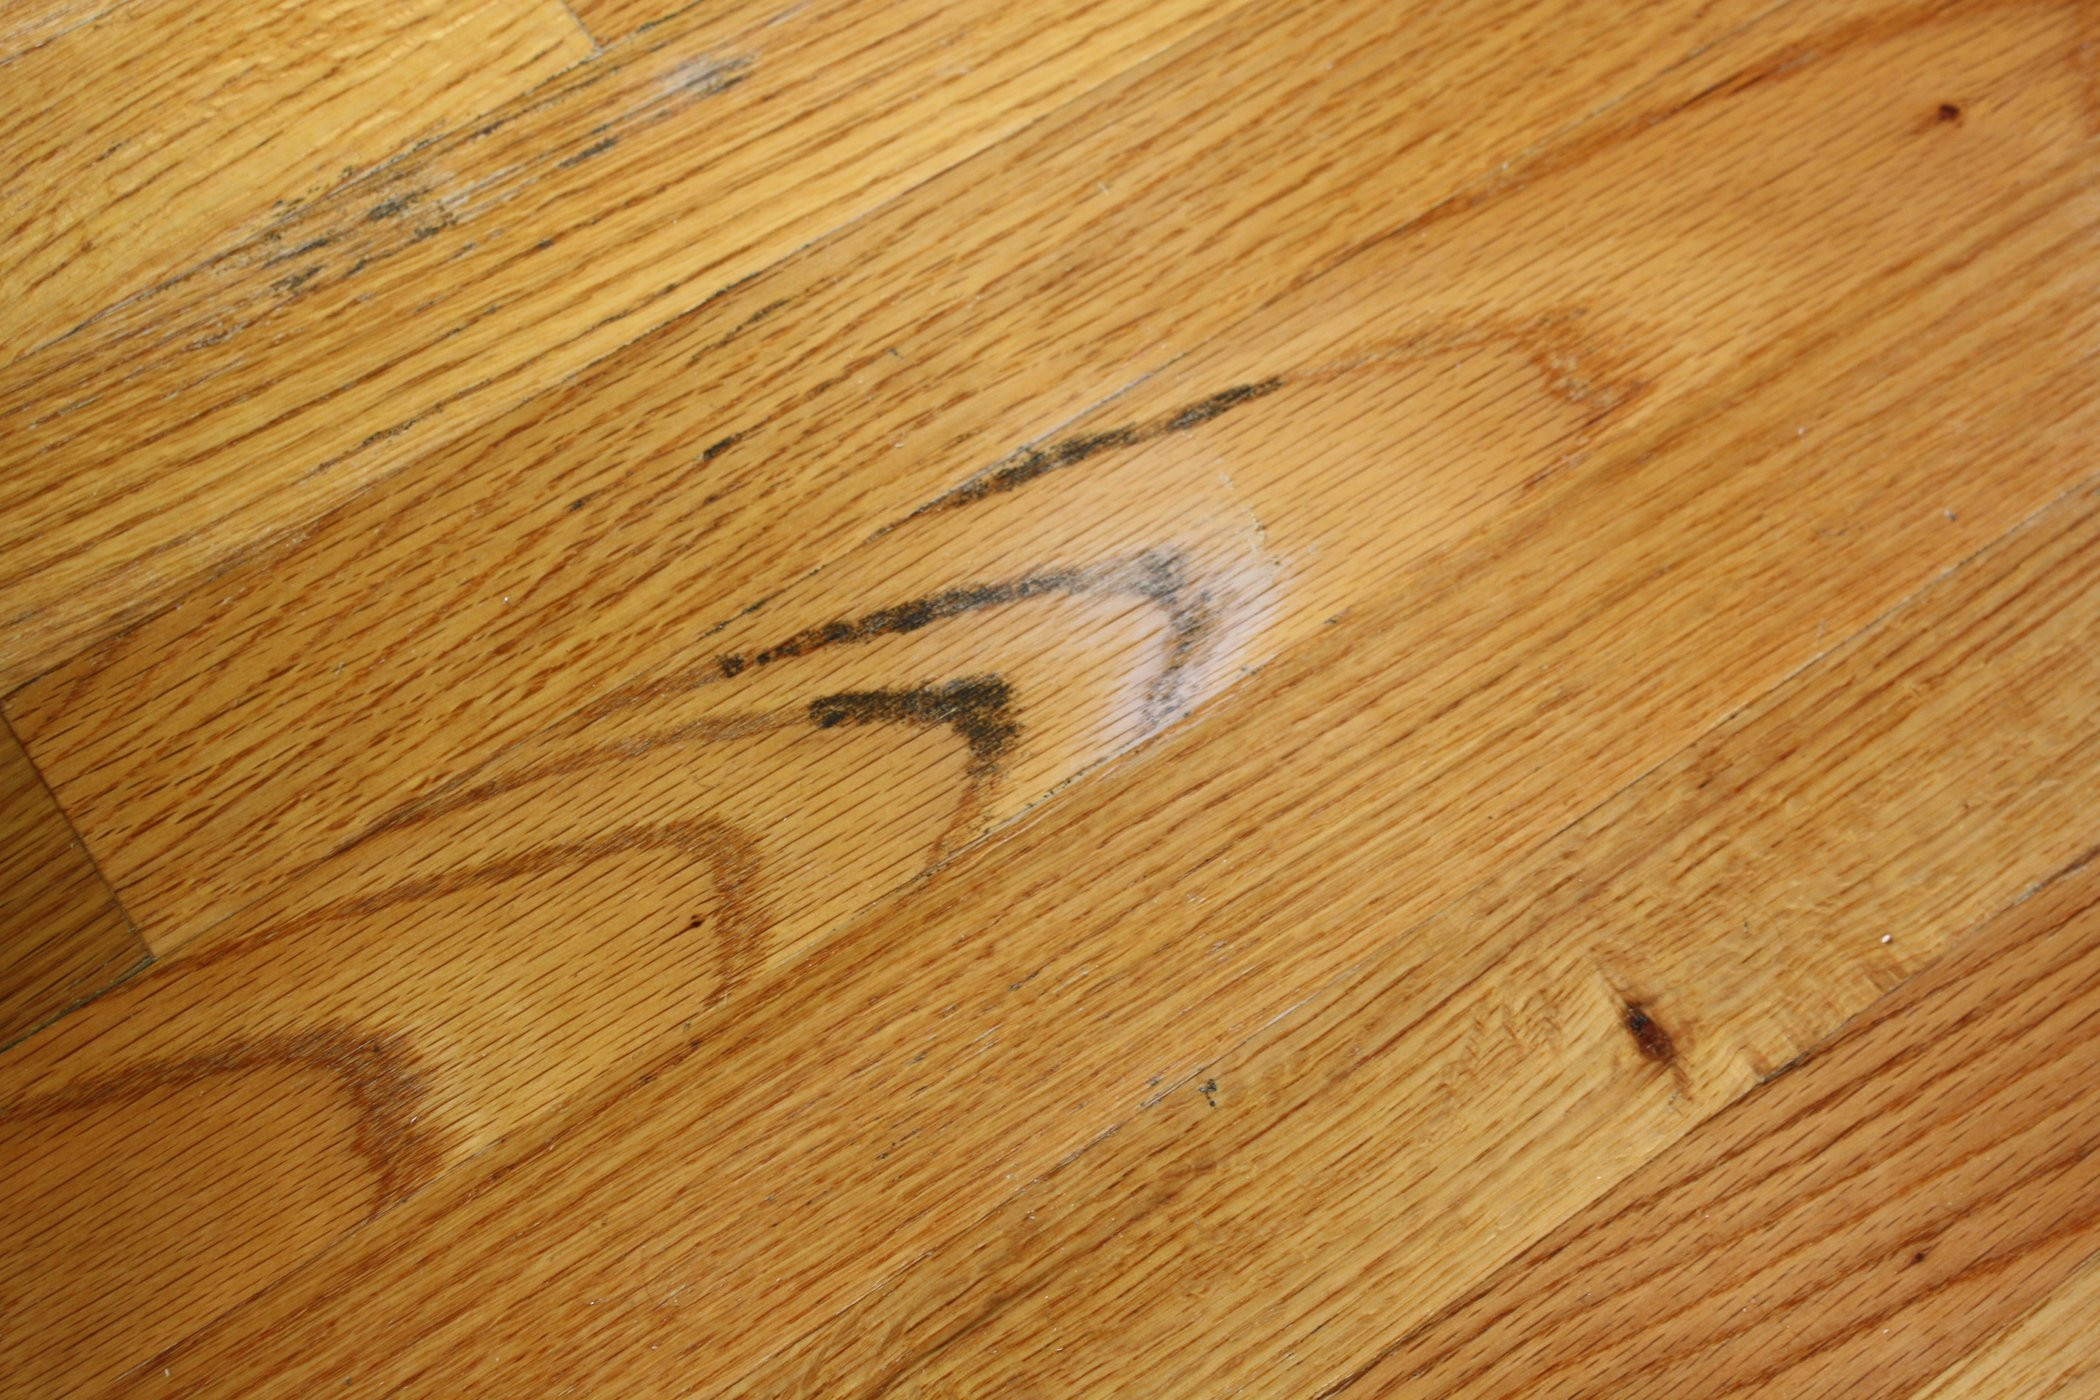 Engineered Hardwood Flooring 3 8 Vs 1 2 Of How to Clean Mold From A Wood Floor 4 Steps Regarding Fylcmqyg7dyp6ds